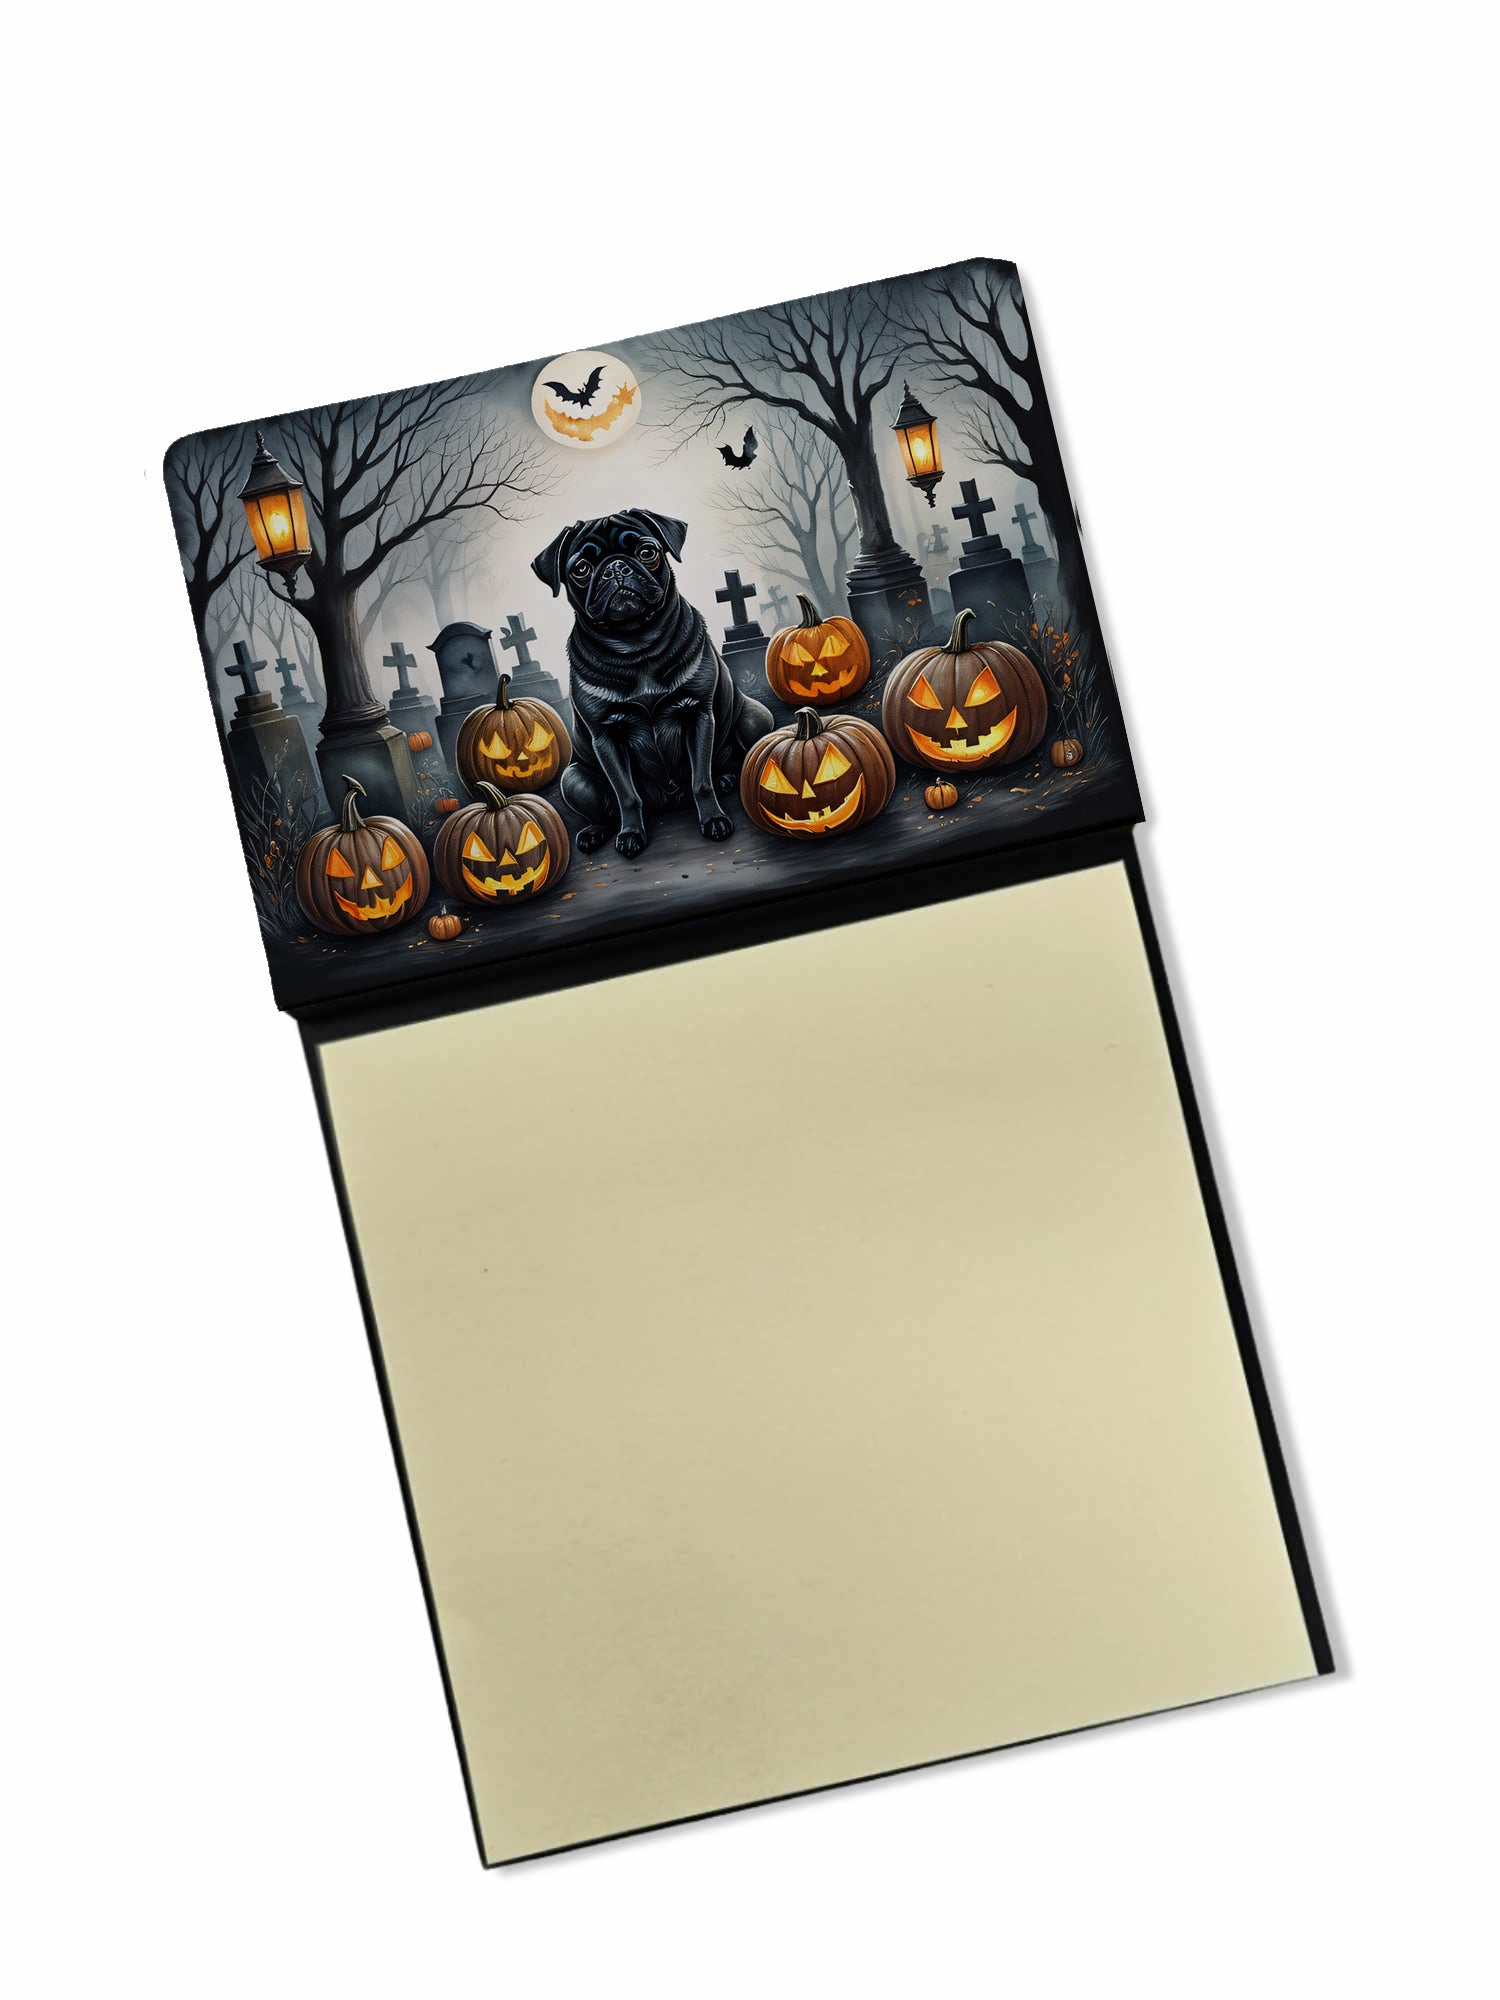 Buy this Black Pug Spooky Halloween Sticky Note Holder